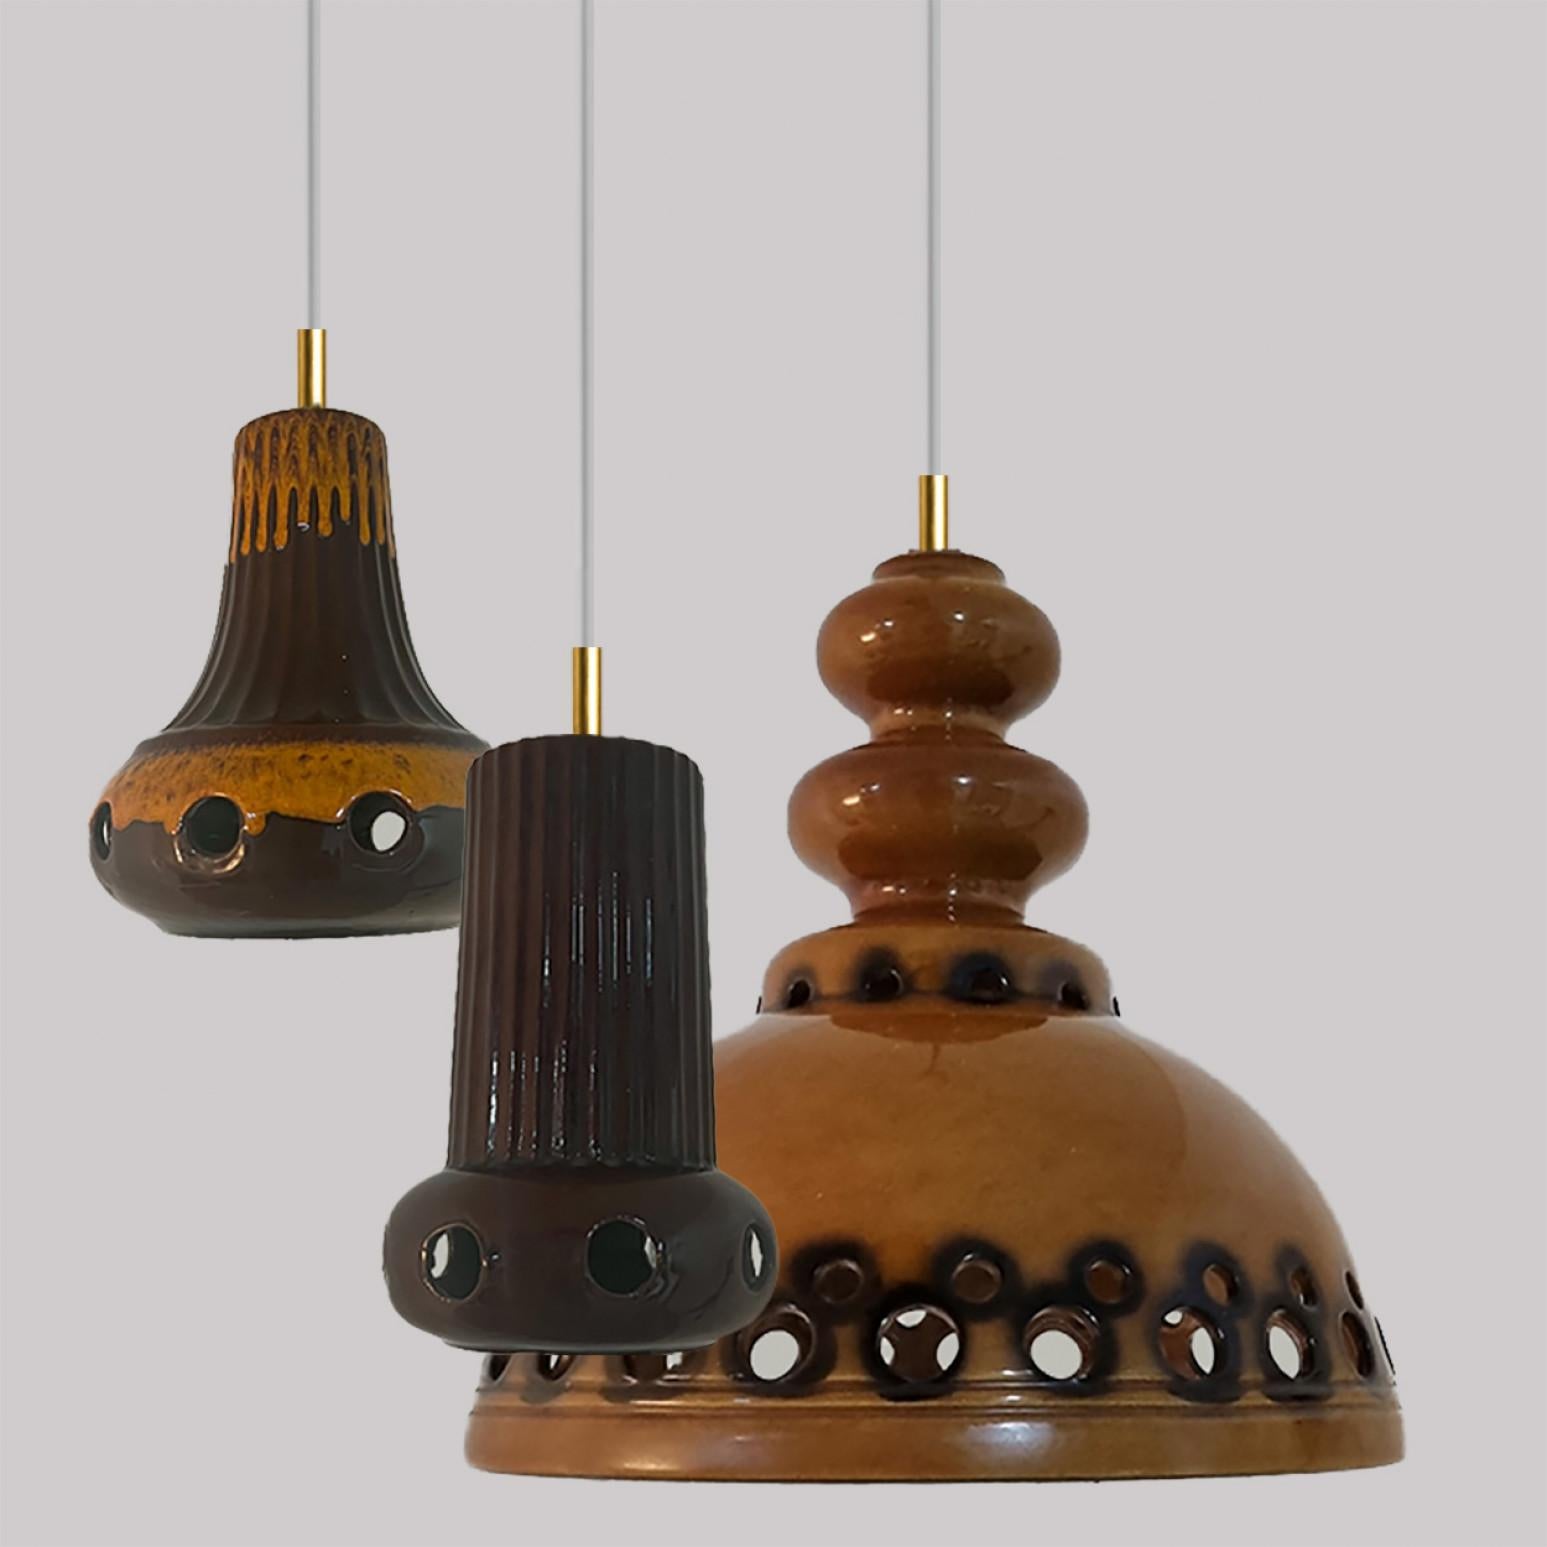 A set of spectacular and stylish ceramic pendant lights made in West-Germany around 1970's. The lights are made of orange and brown glazed ceramic and glazed in 'Fat Lava' style. The orange and brown ceramic fits beautifully with warm, gold or clear